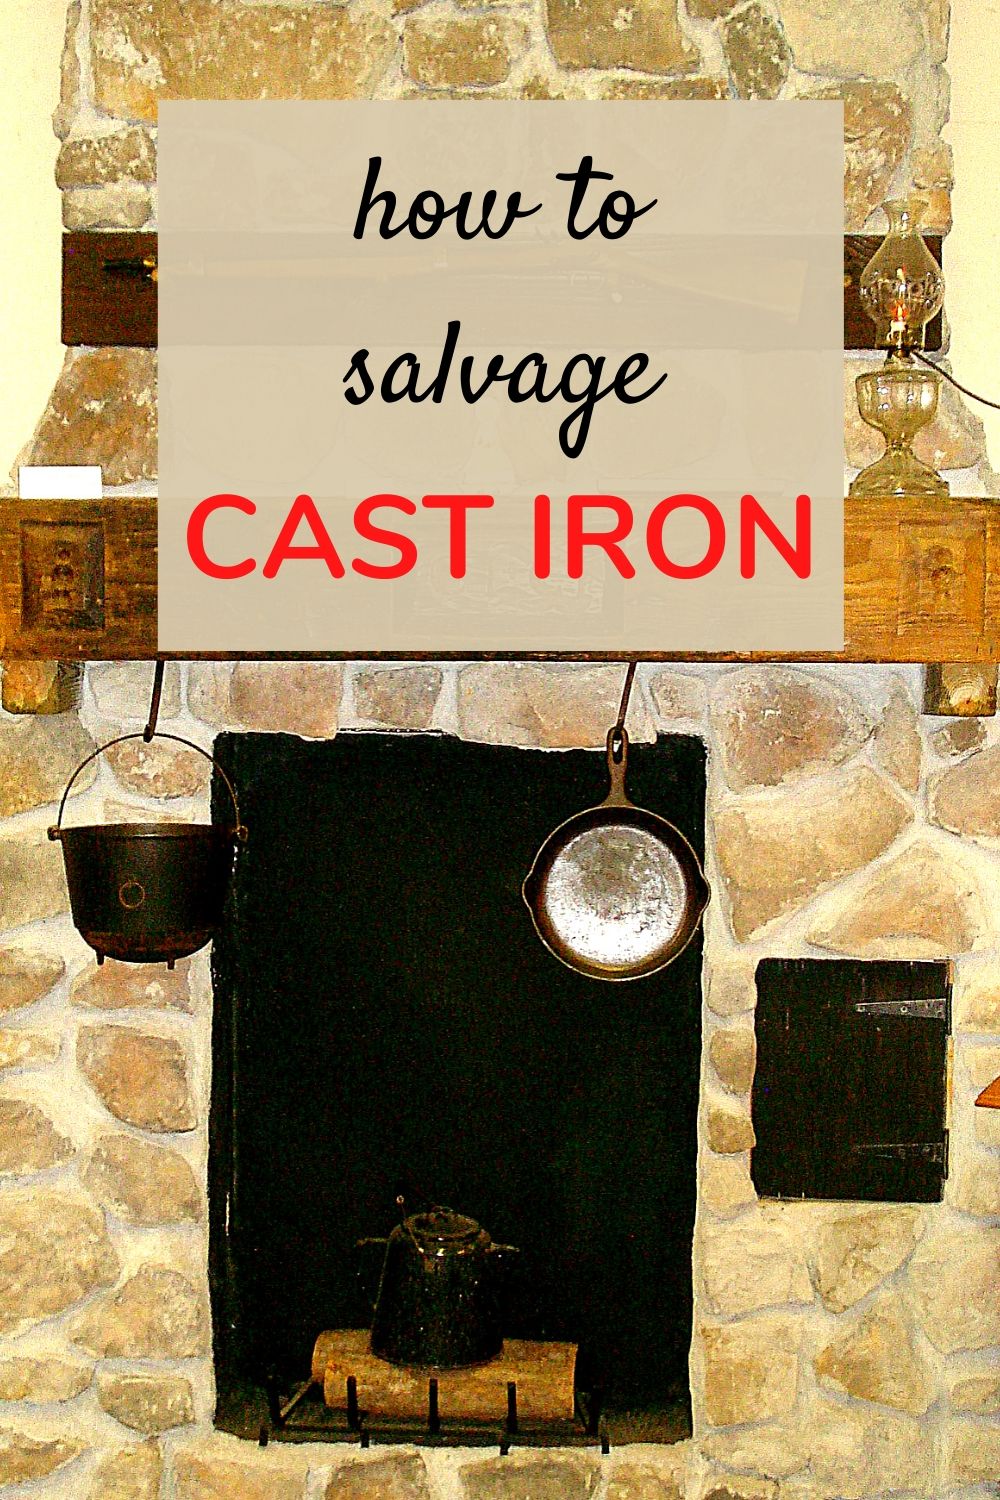 How to Salvage Cast Iron